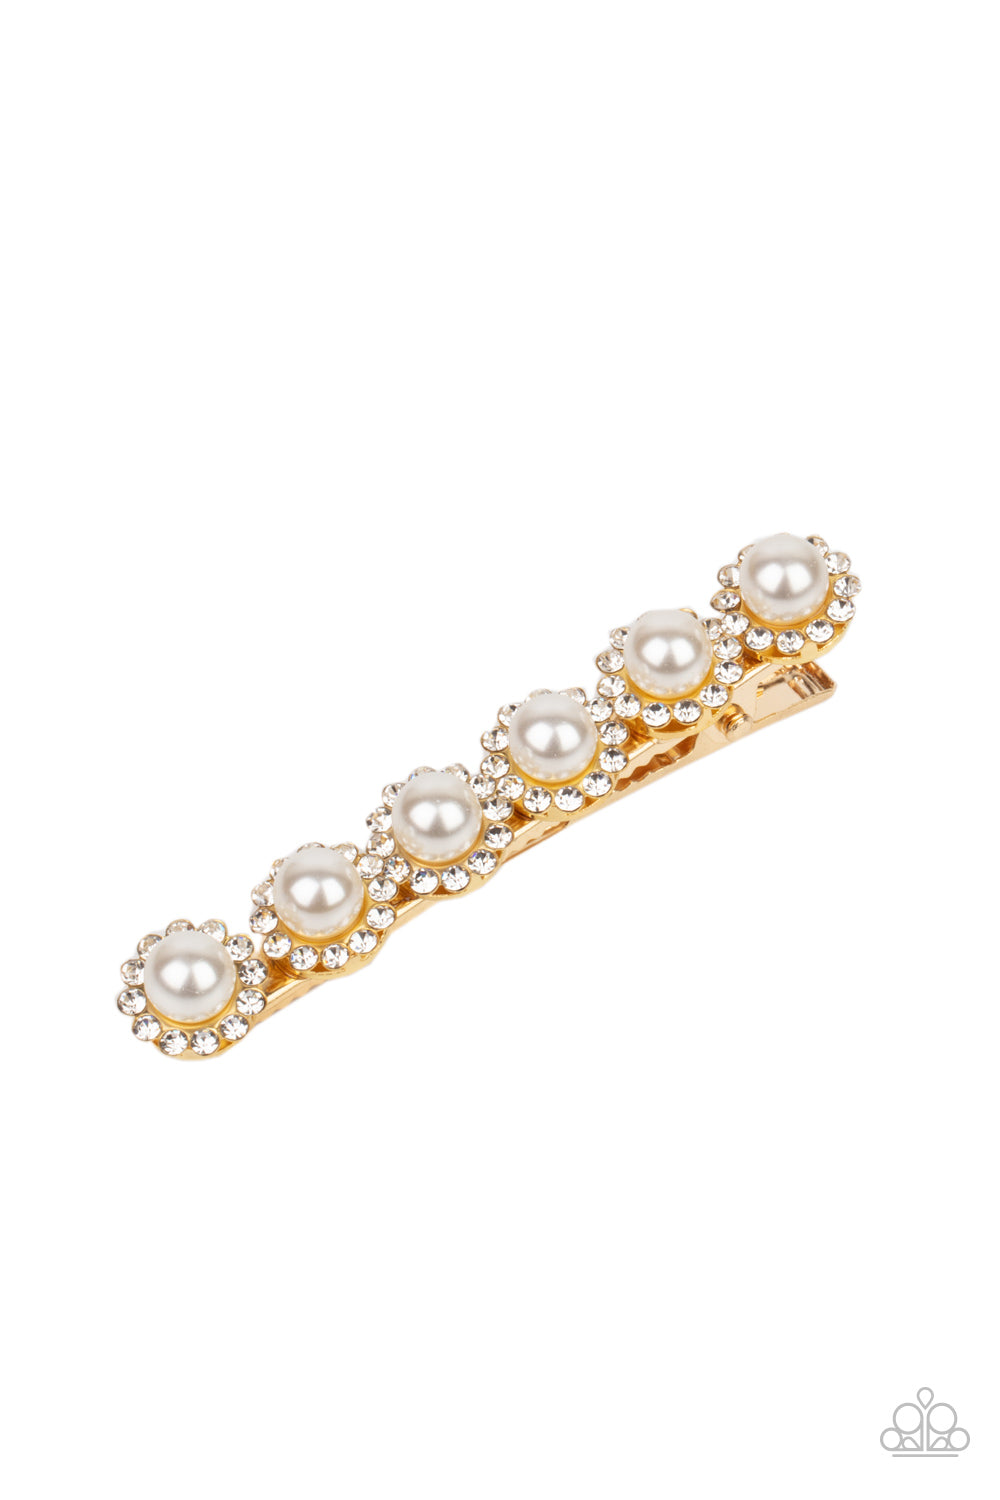 Polished Posh - Gold Pearl Hair Clip bordered in rings of dainty white rhinestones, pearly white beads embellish the front of a gold hair clip for a timeless finish.  Sold as one individual hair clip.